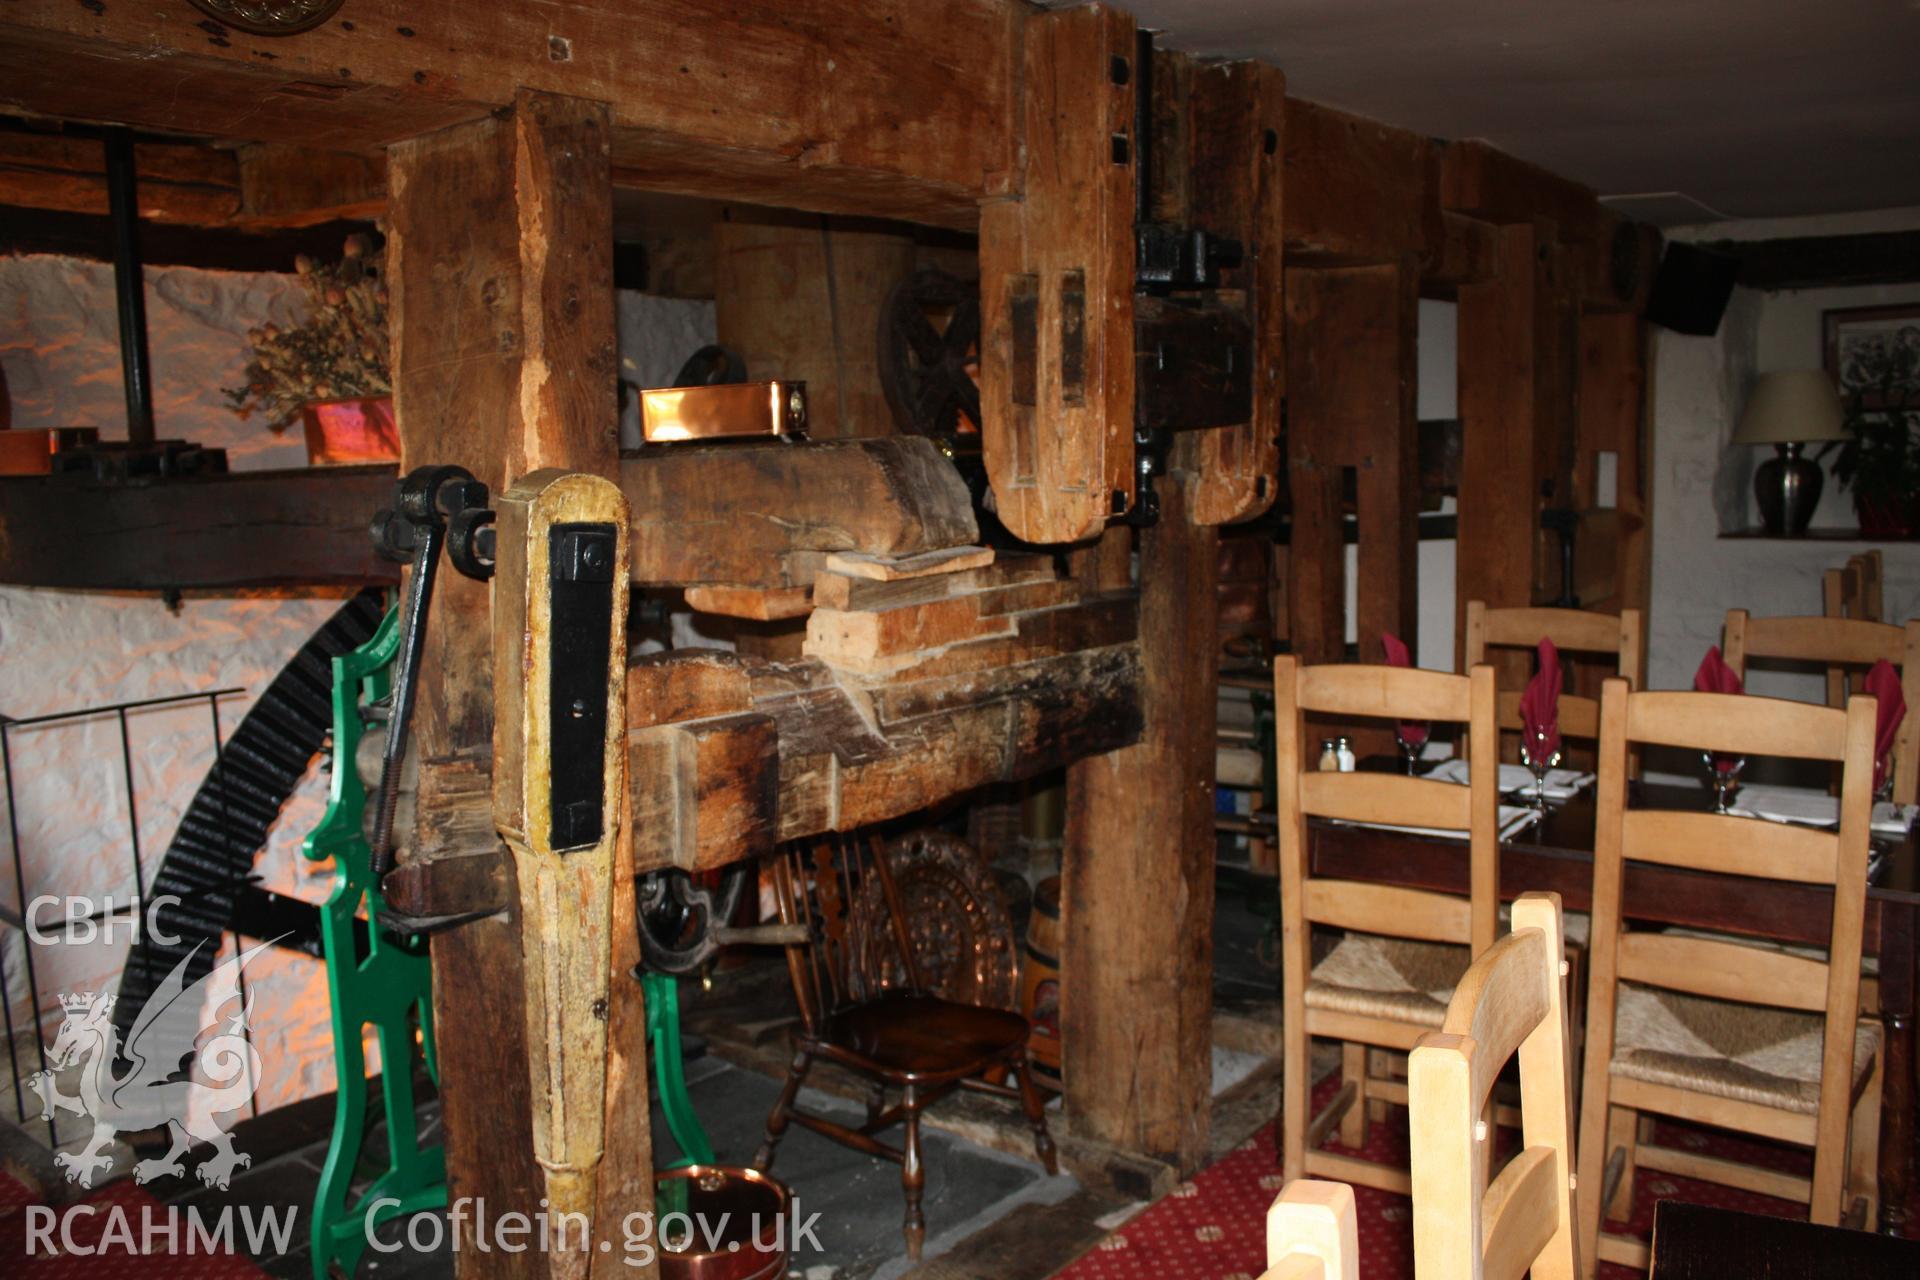 Colour photograph showing interior view of Brookhouse Mill, now a restaurant and bar in Denbigh, Photograpraphed during survey conducted by Geoff Ward circa 2010.